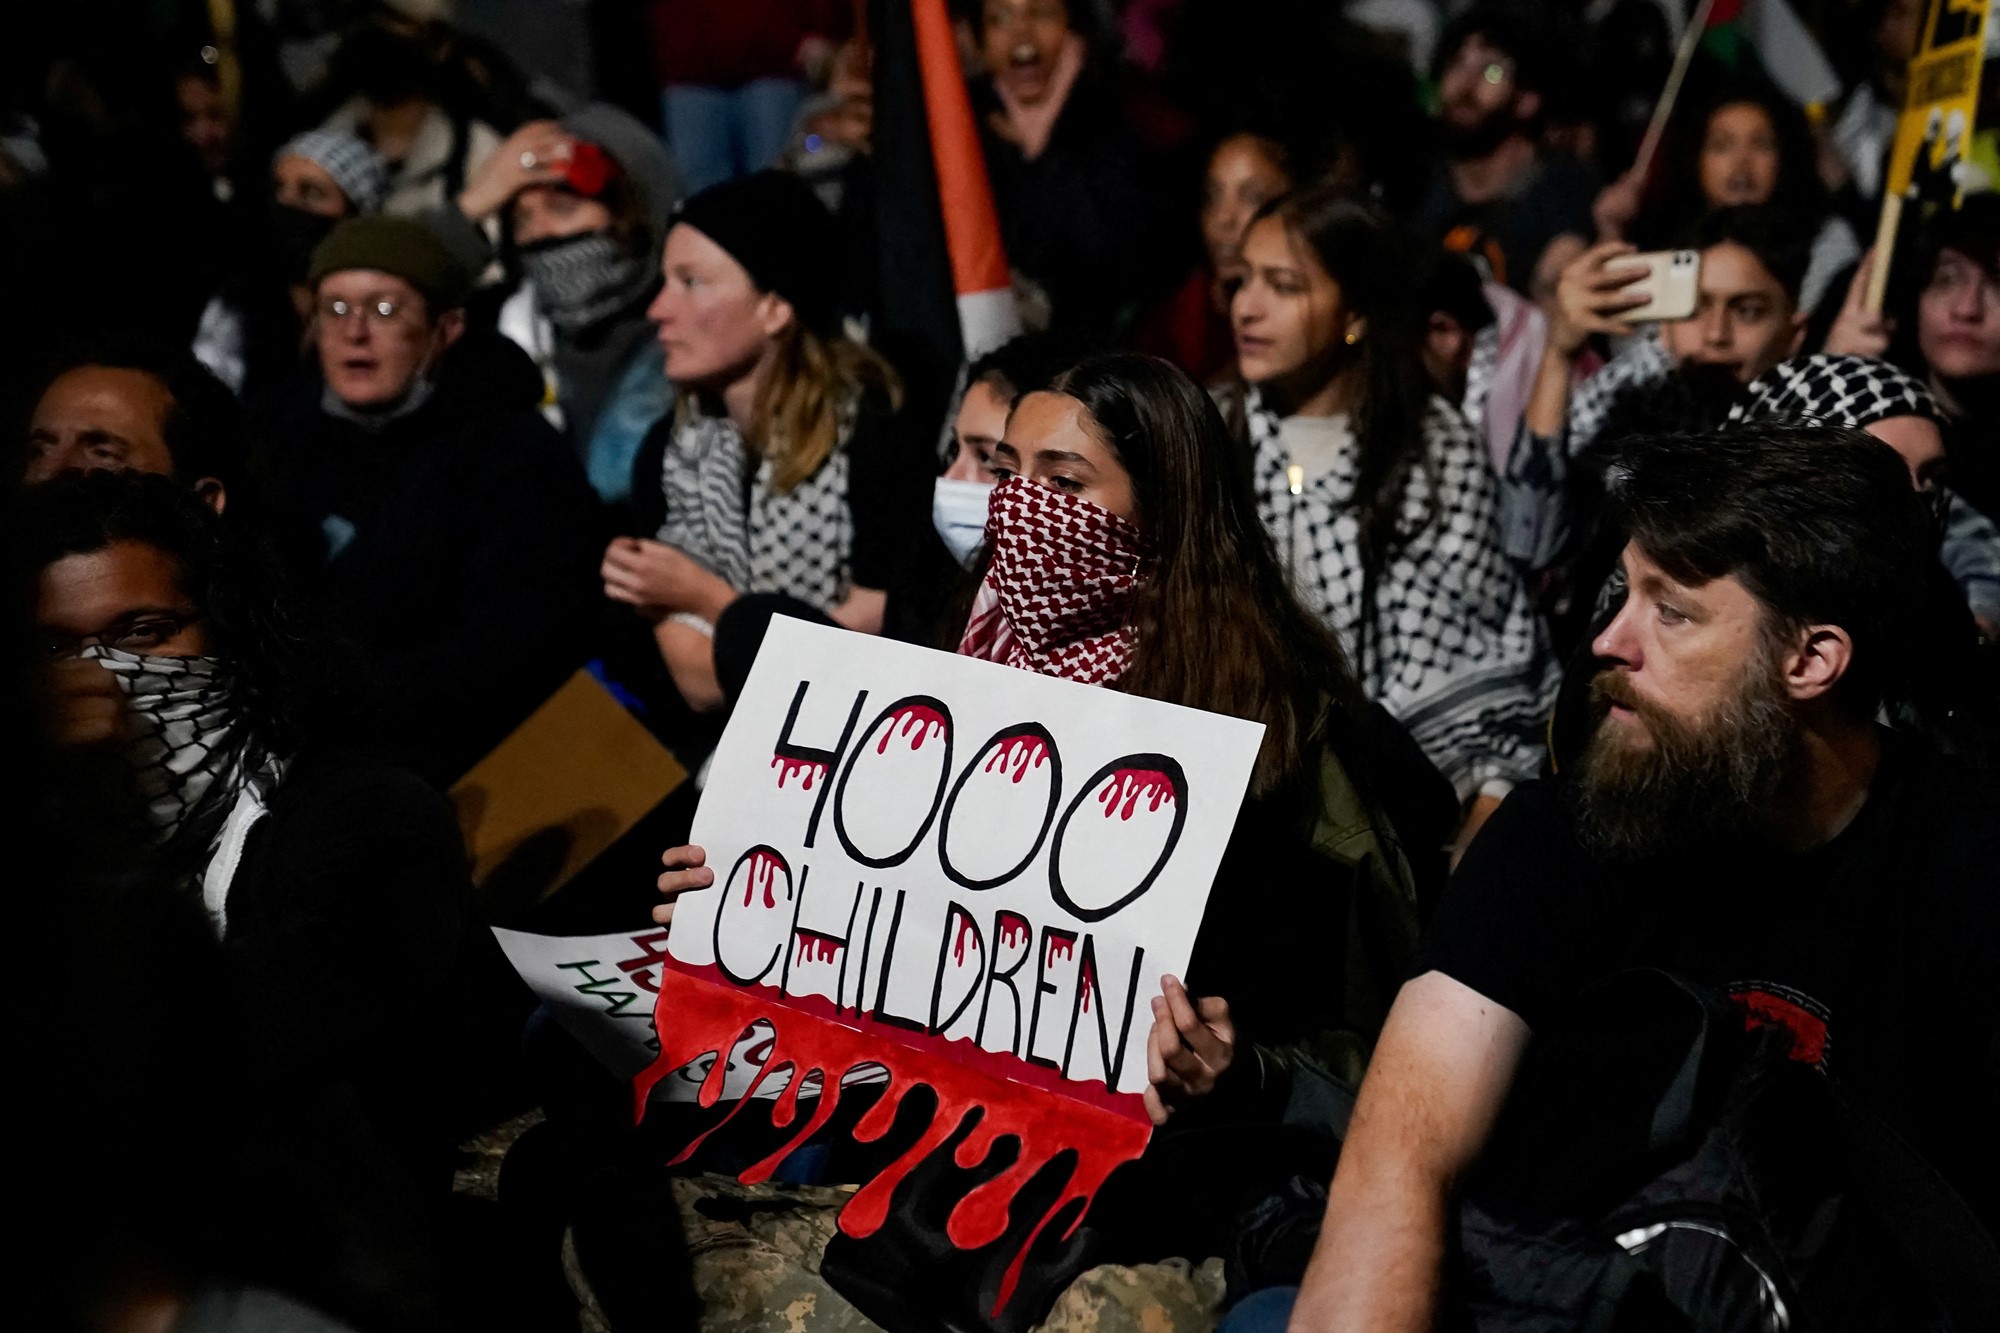 A female protester with her mouth covered with a Palestinian scarf holds a sign saying "4000 children" with dripping blood drawn on it